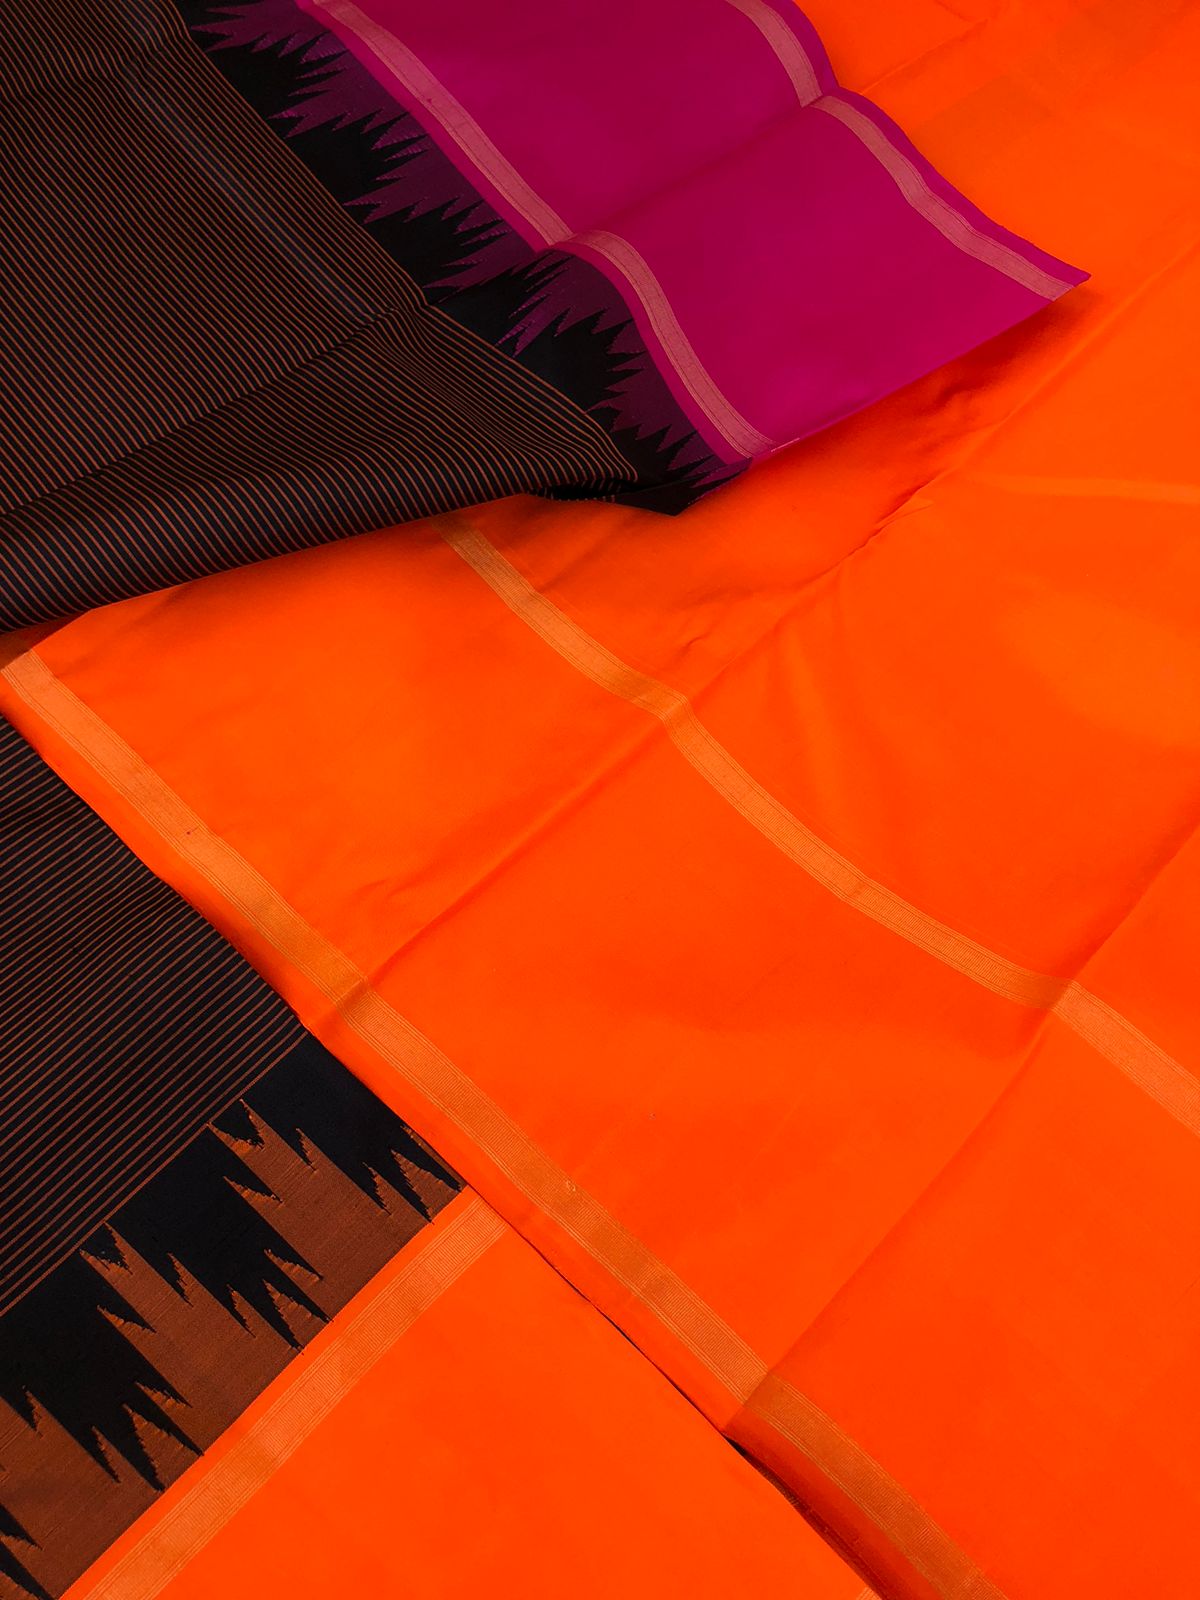 Connected by Korvai on Kanchivaram - a beautiful black stripes body with orange and pink ganga jammuna woven borders